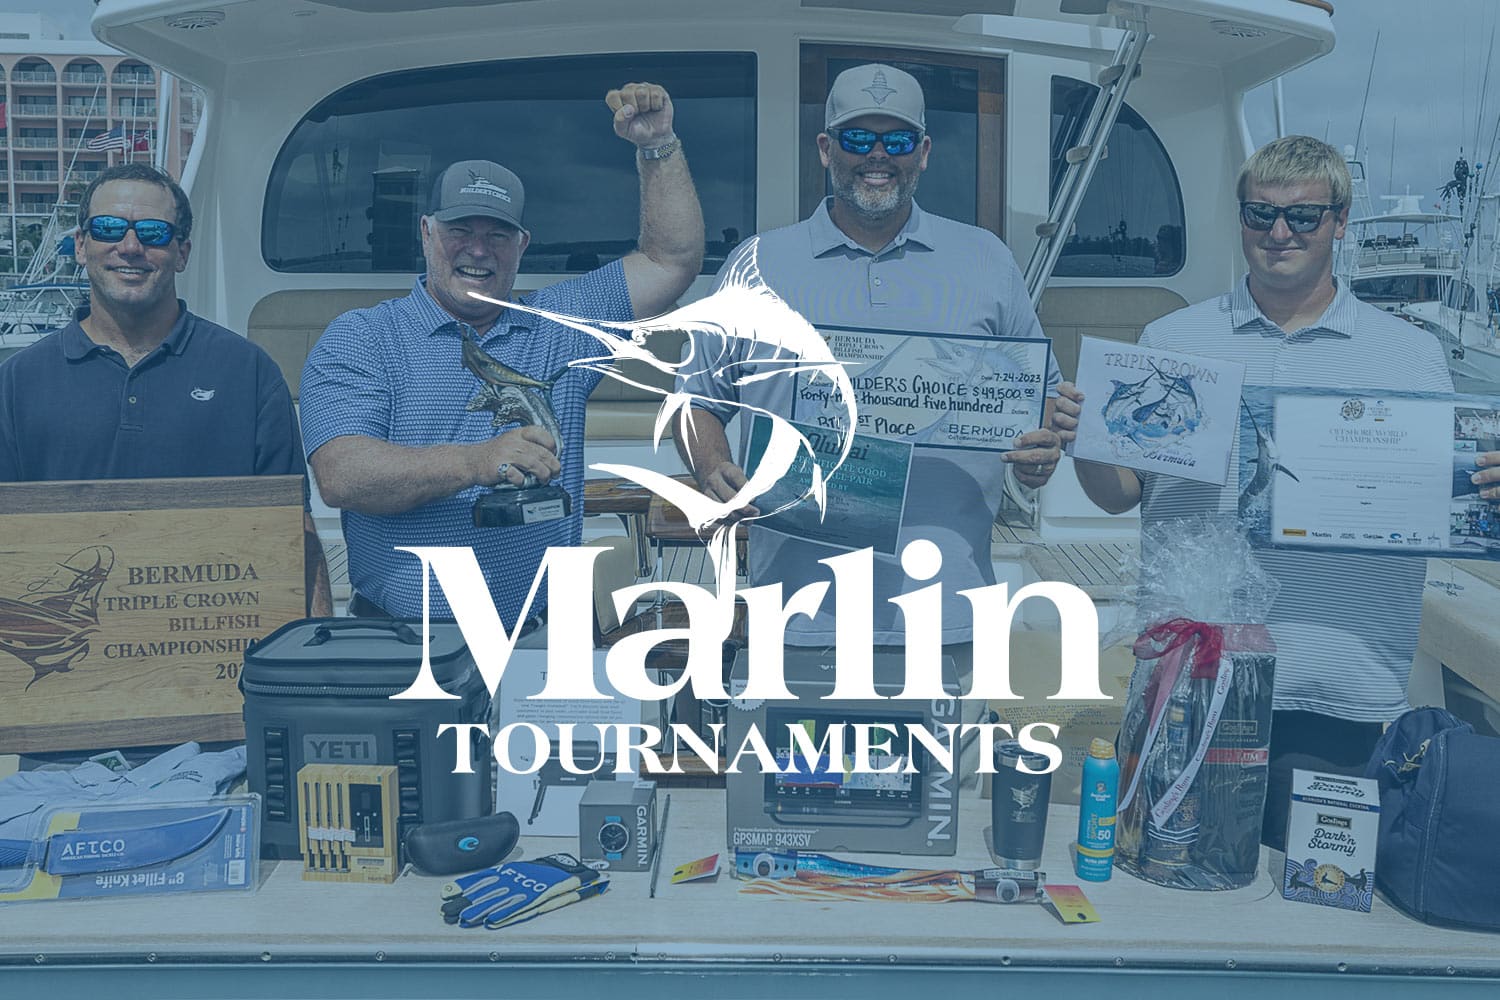 Marlin Tournaments logo in white overlaid a blue-filter image of a sport-fishing team holding up awards.